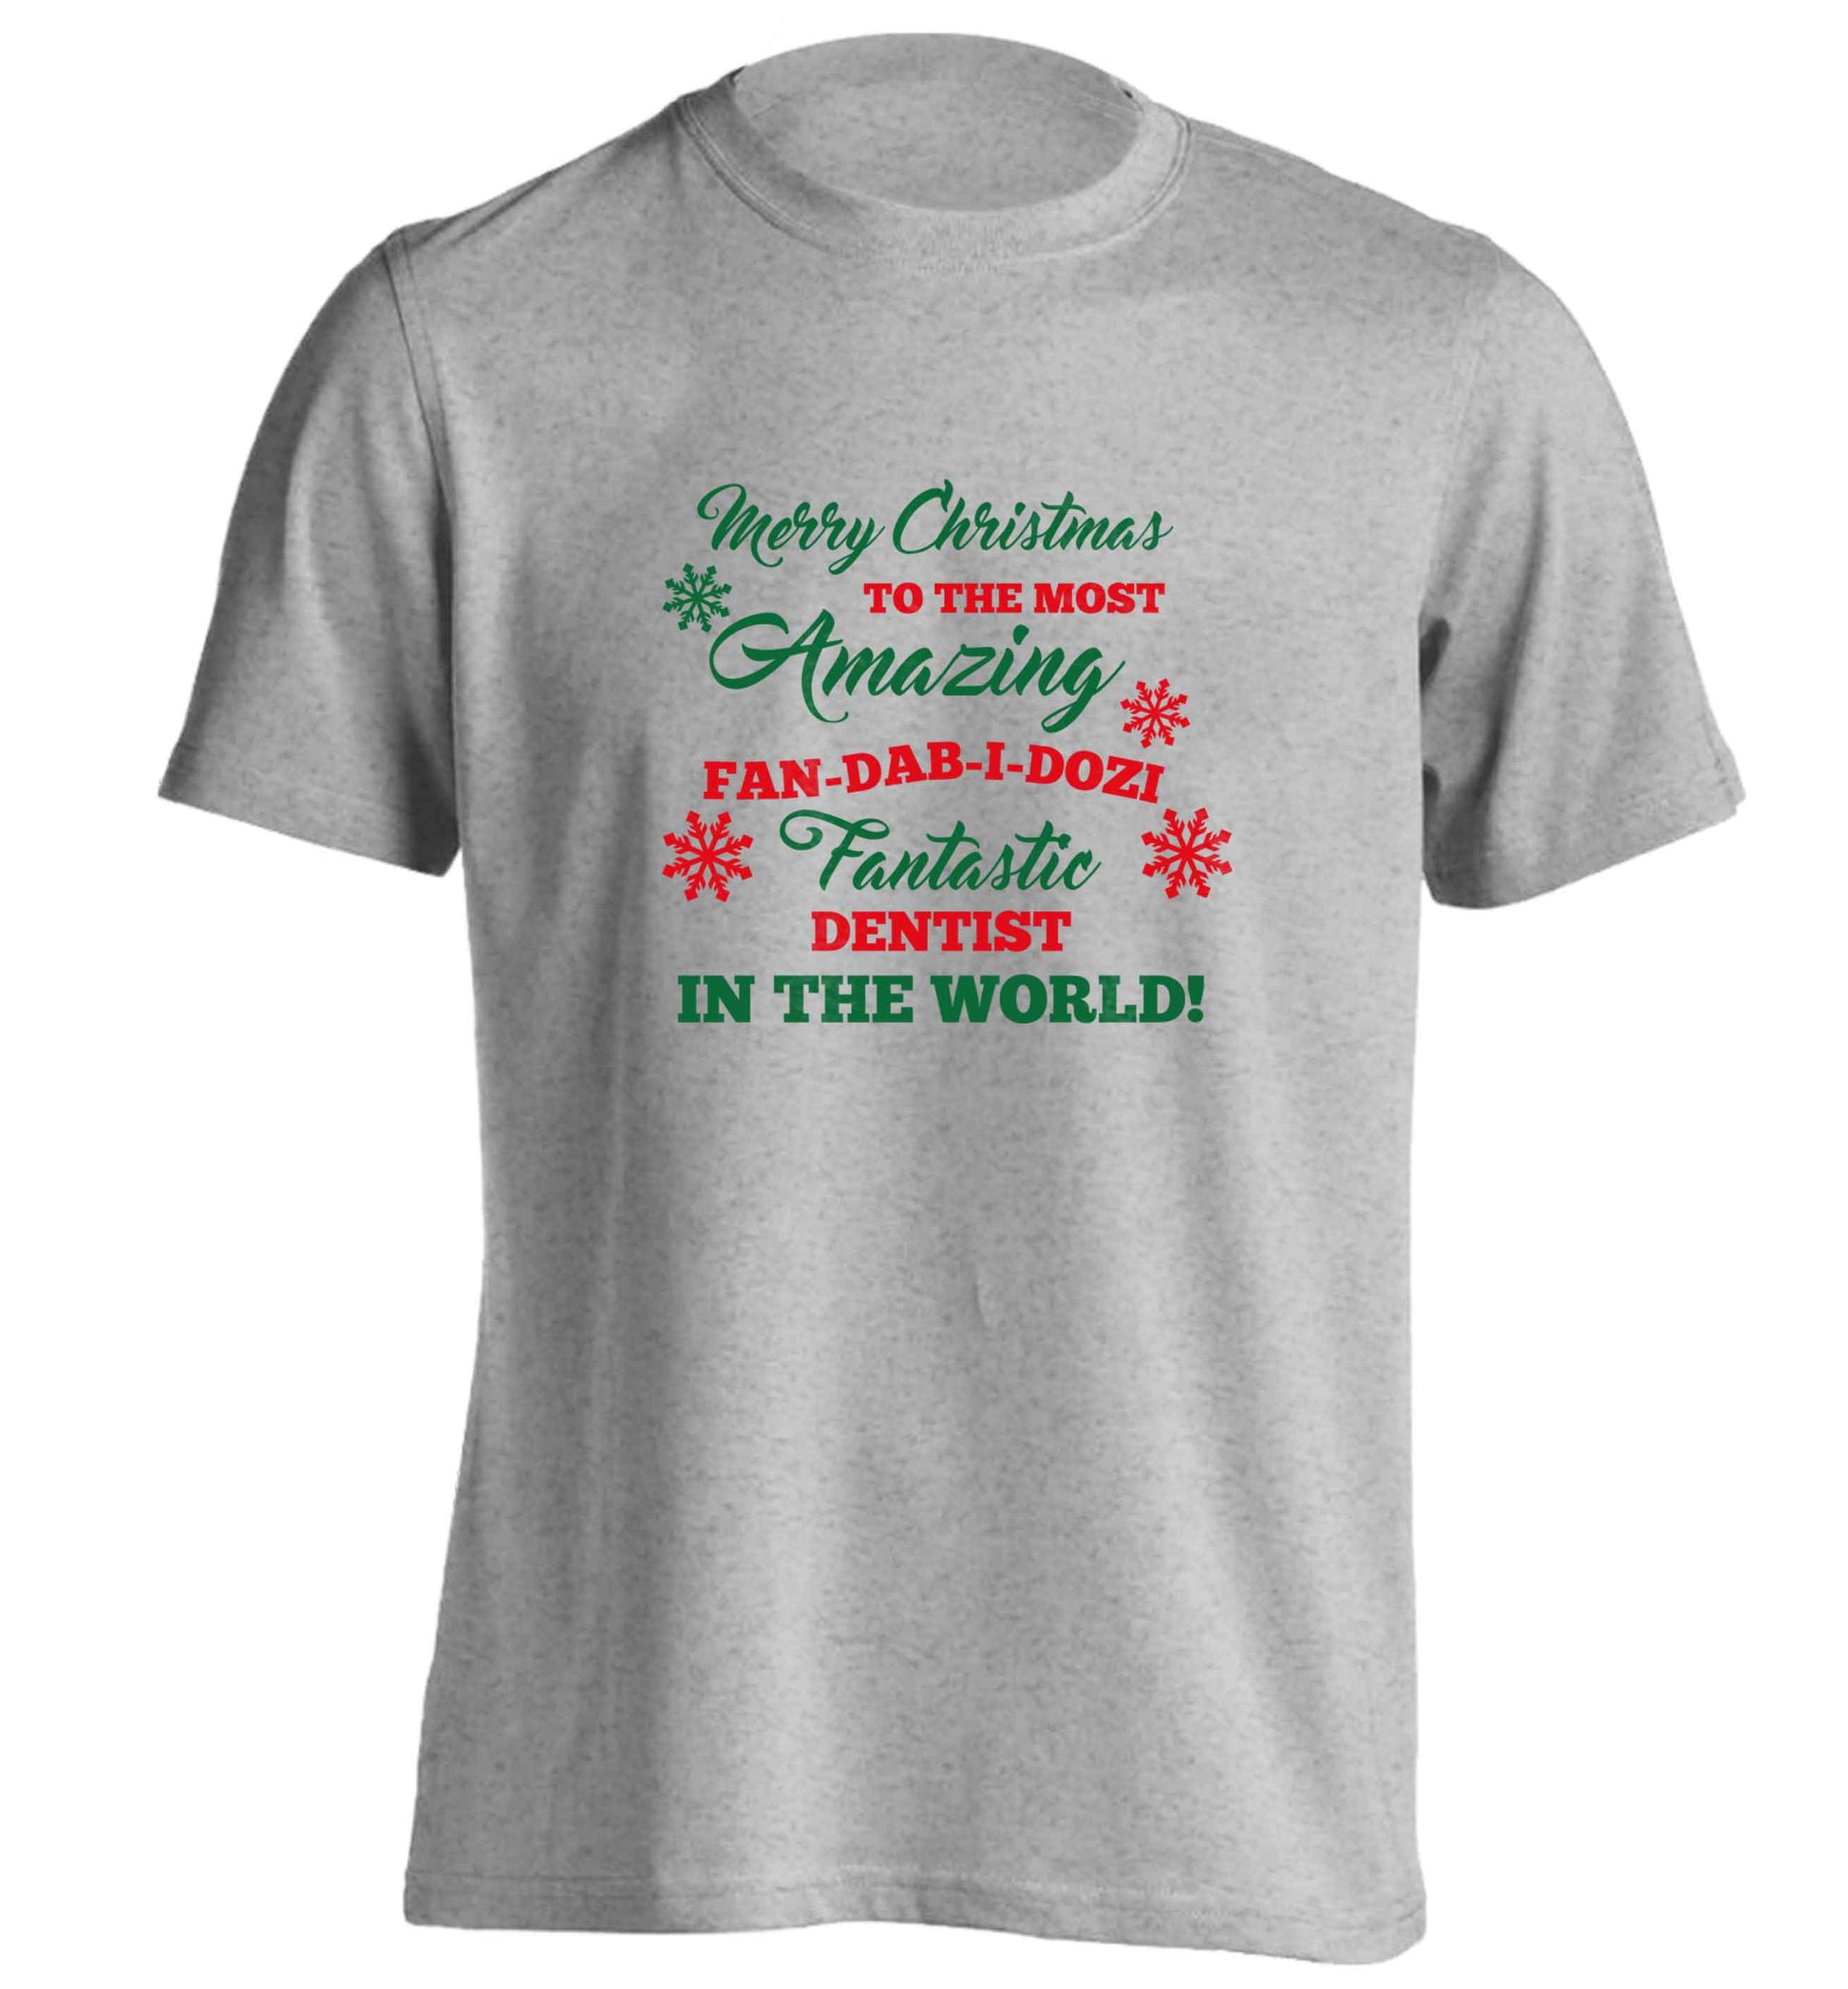 Merry Christmas to the most amazing dentist in the world! adults unisex grey Tshirt 2XL